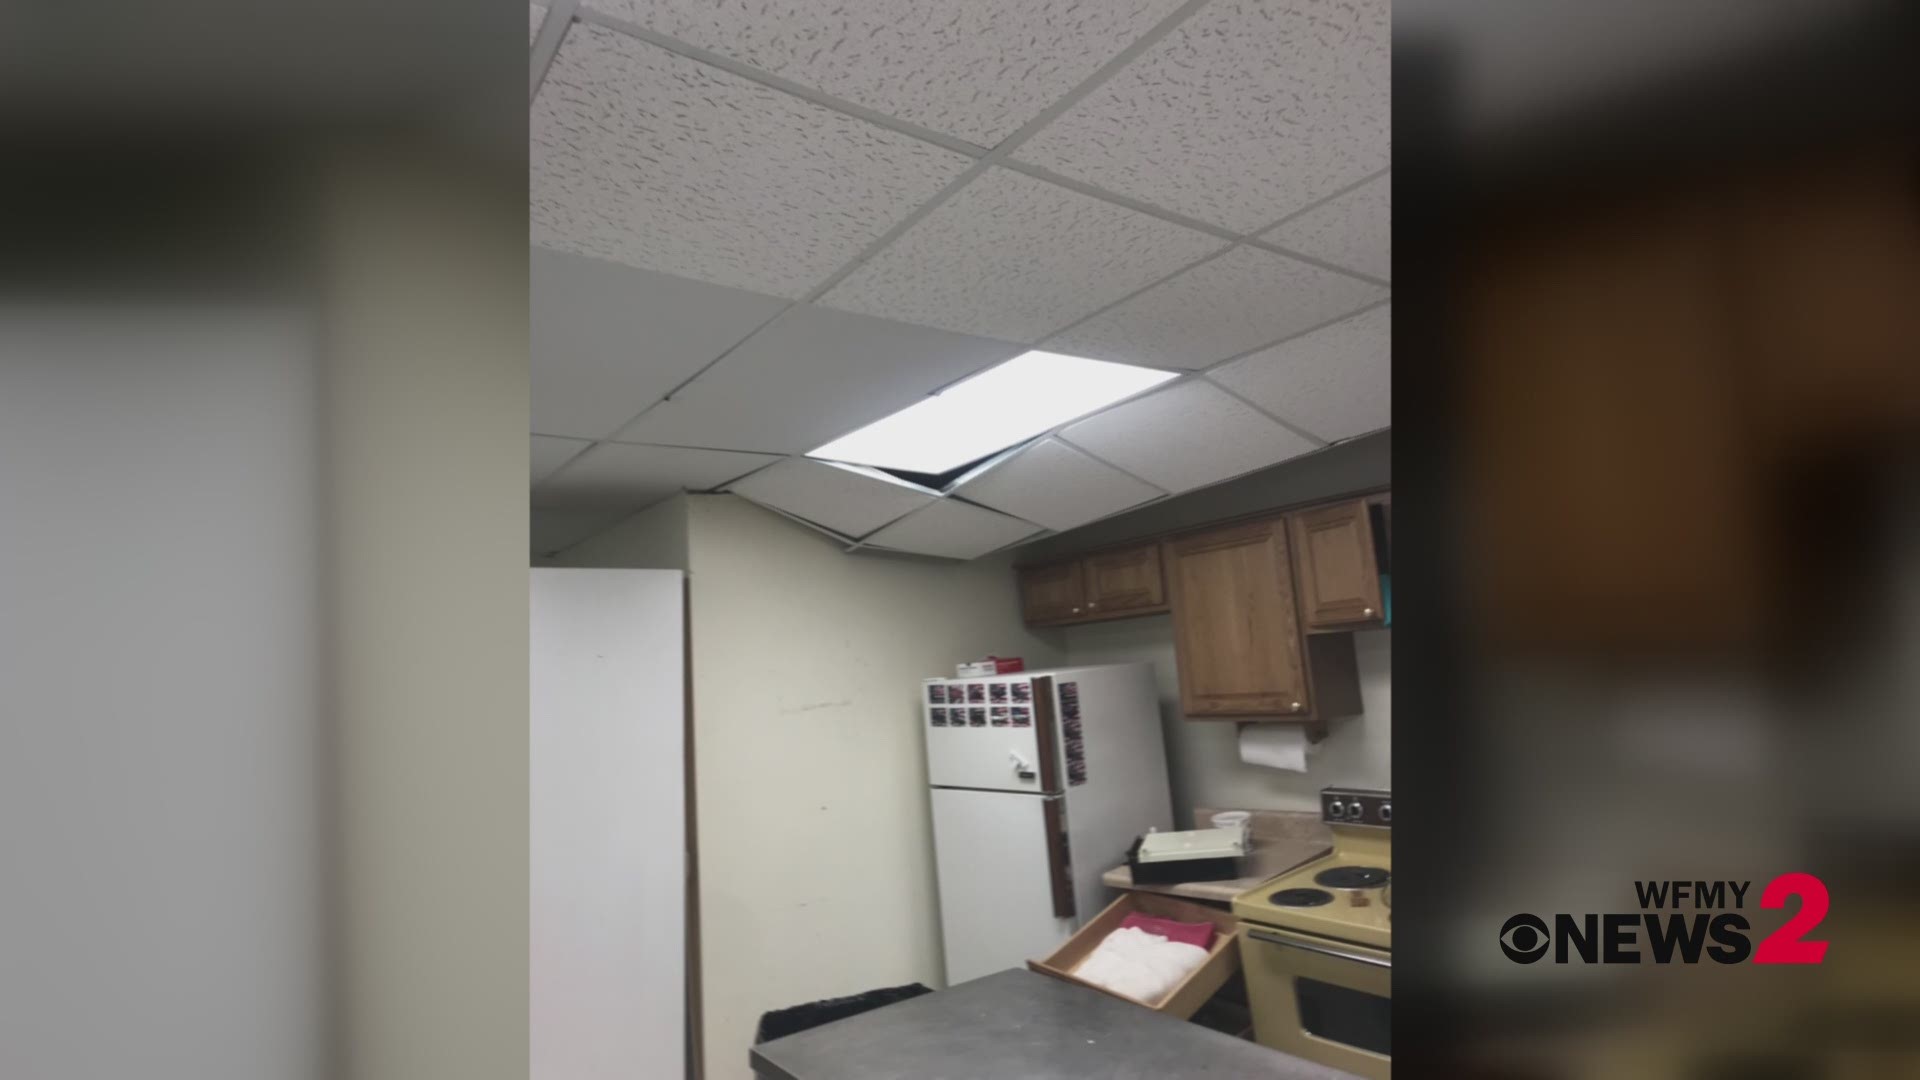 Video of damage inside home caused by Sunday's earthquake in Sparta, NC.